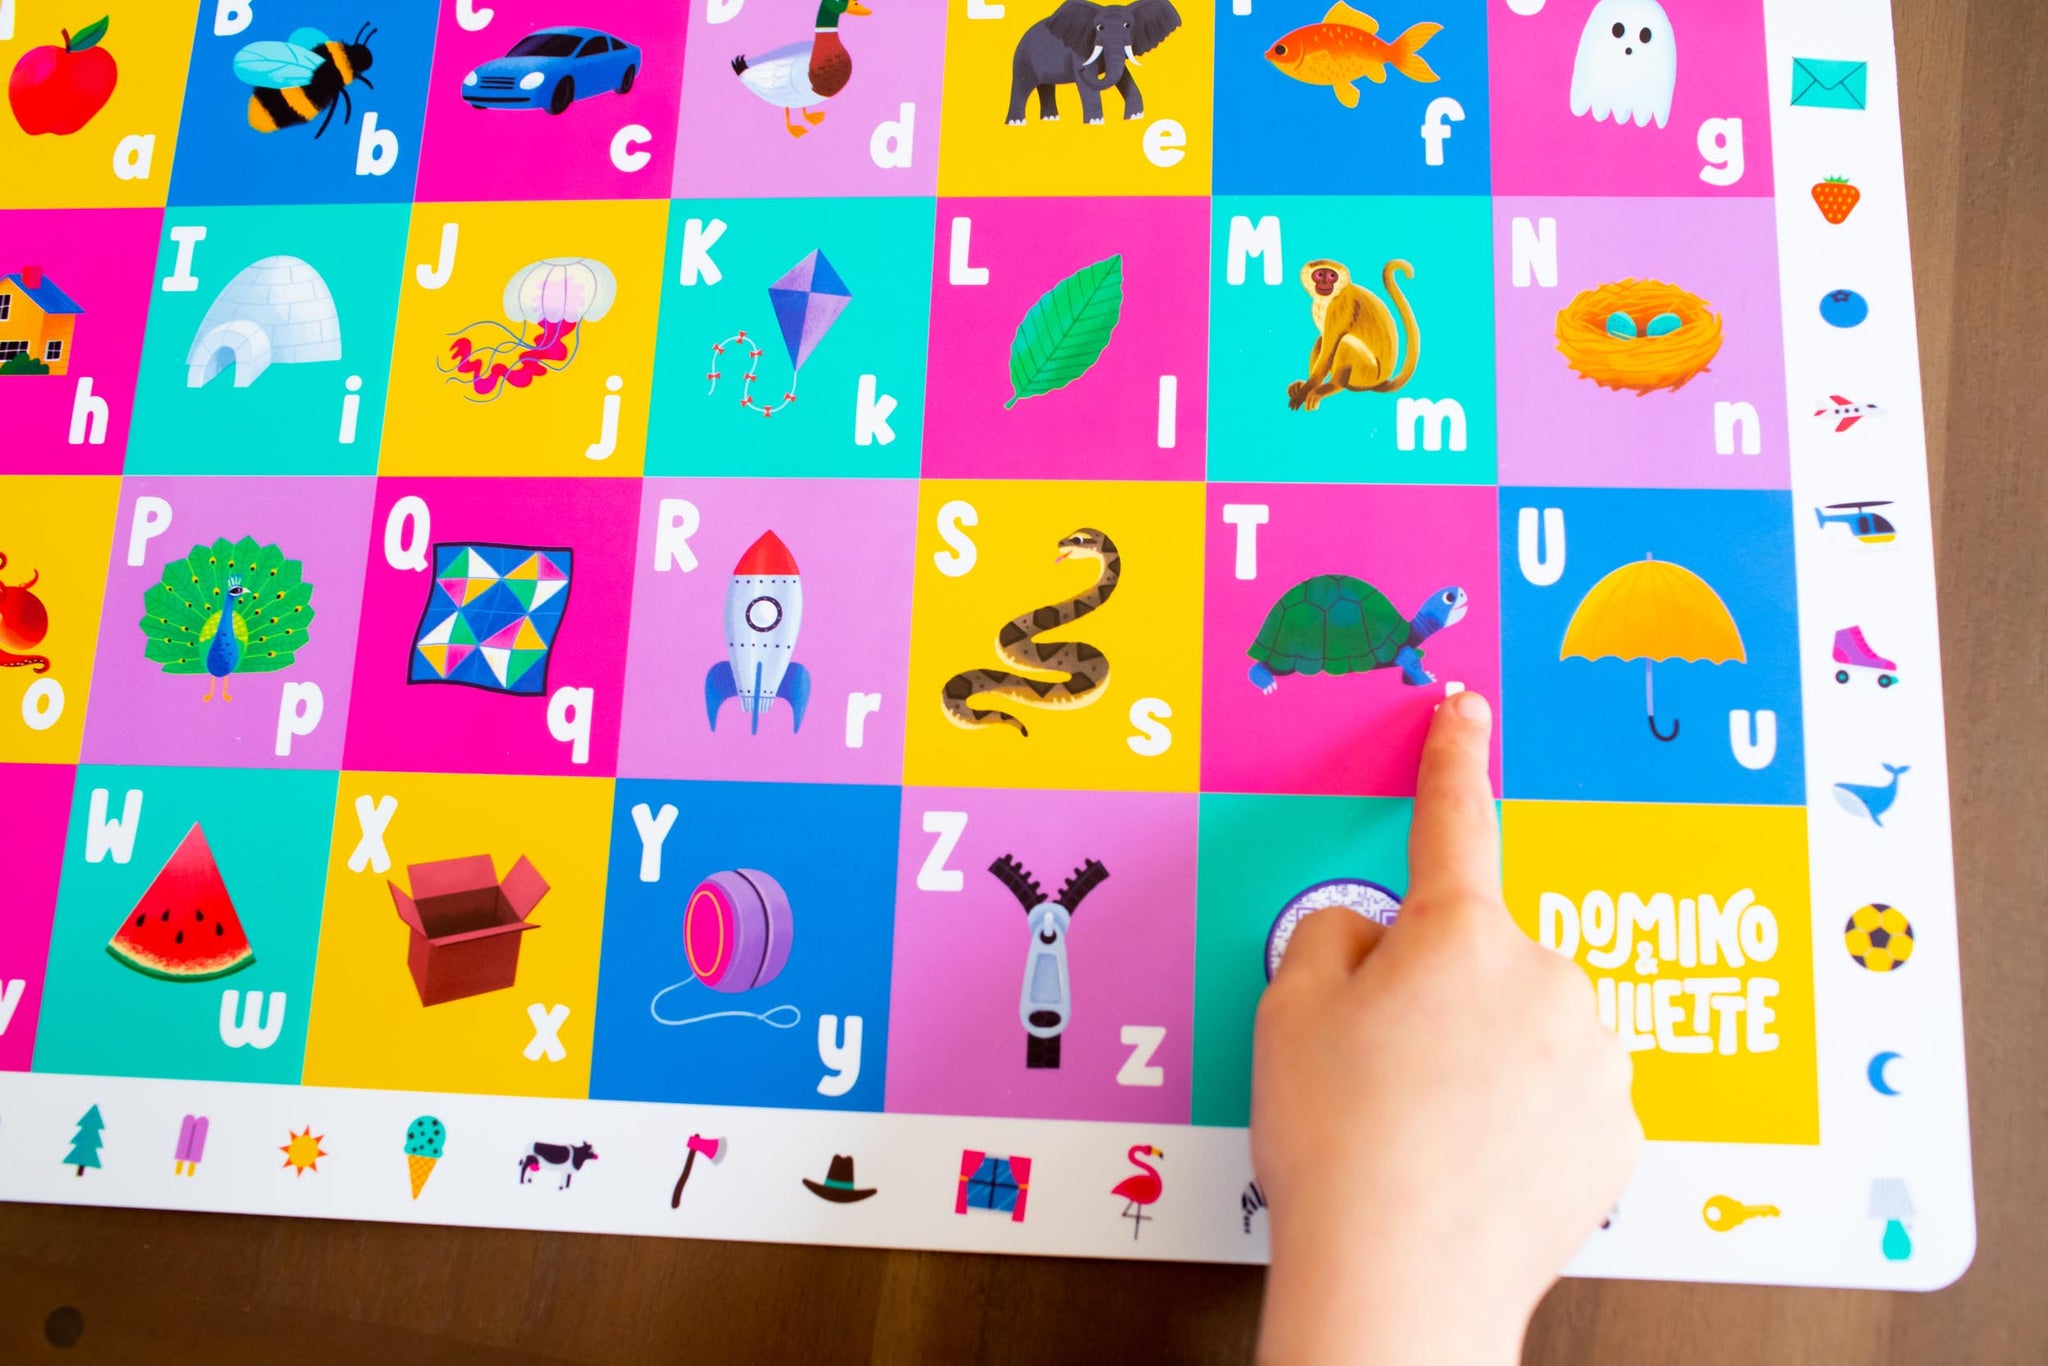 Phonics Placemat, Phonics Placemats, Phonics Sounds, Phonics Words, double-sided phonics placemat, alphabet letters placemat, phonics images on placemat, durable placemat for kids, easy to clean placemat for kids, educational activities for kids, placemats for children ages 6 months to 7 years